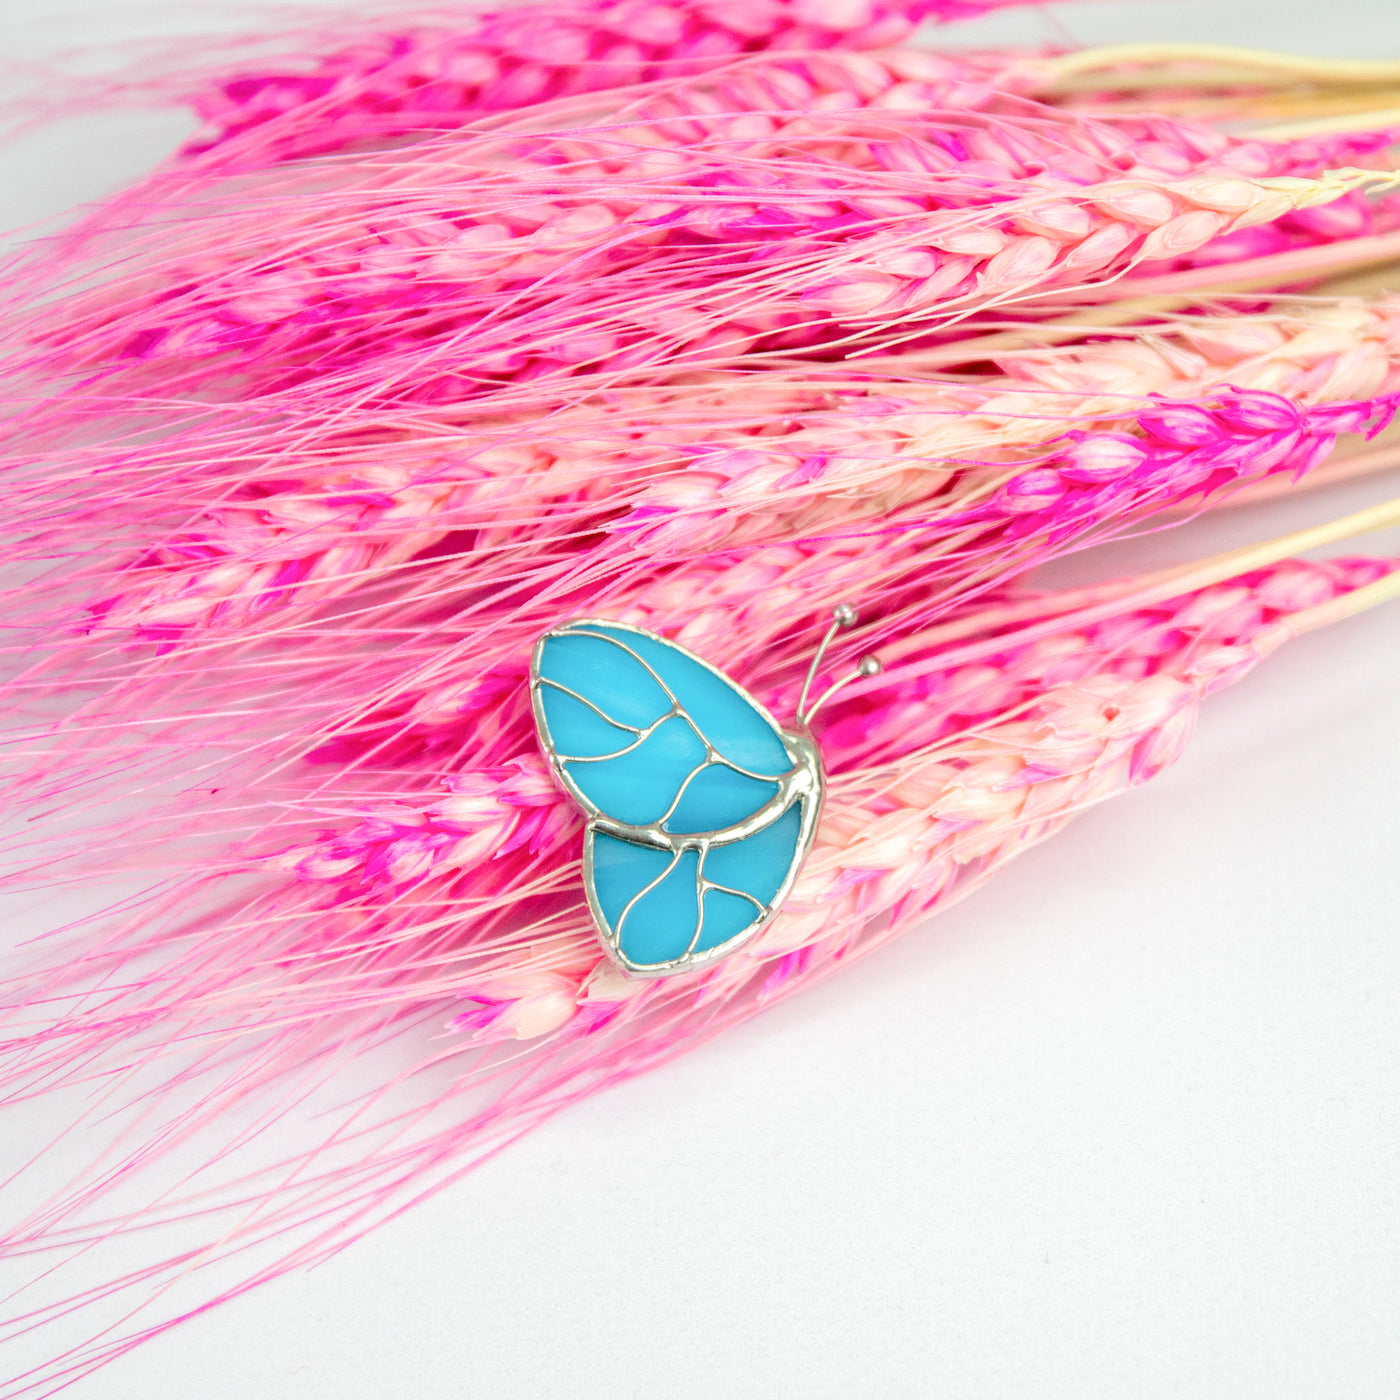 Stained glass brooch of a blue butterfly